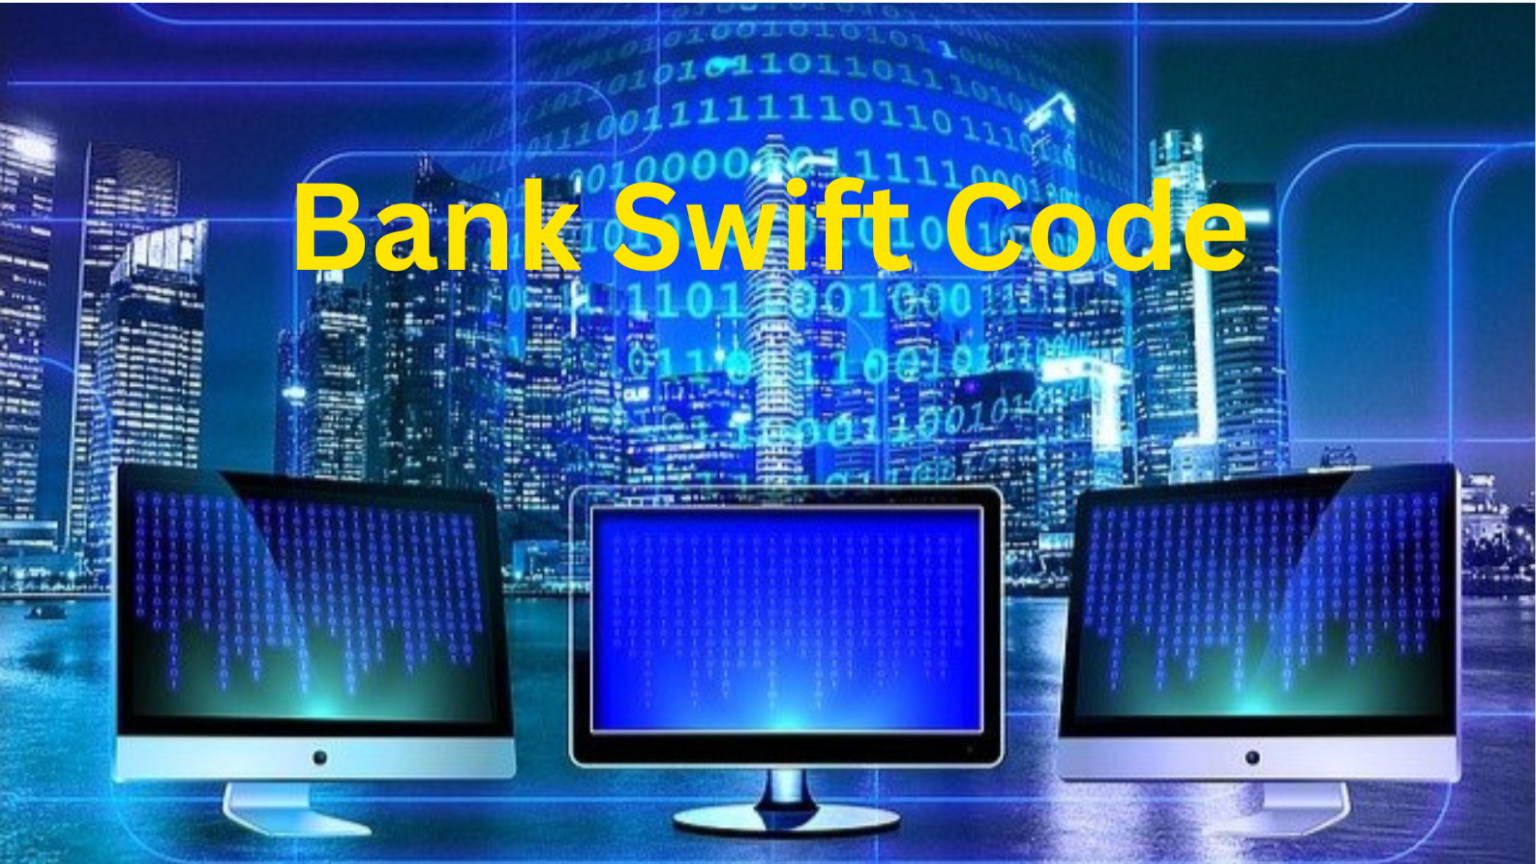 What is Swift Code (BIC) | How to Find Bank Swift Code Online?